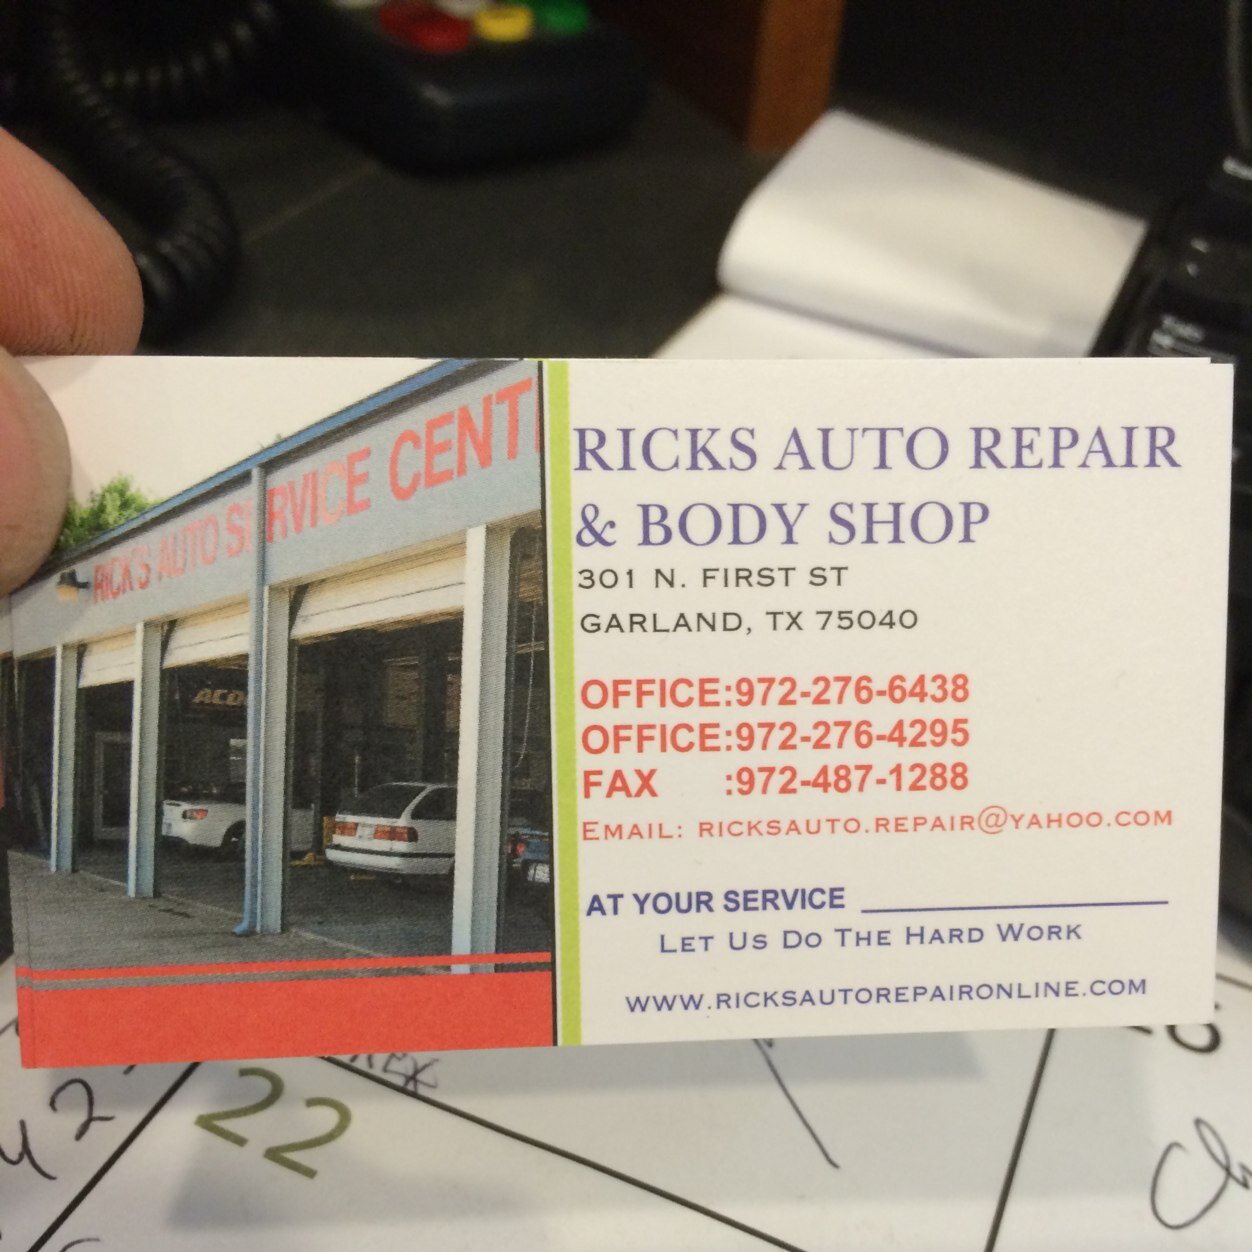 Rick's Auto Service is the Best